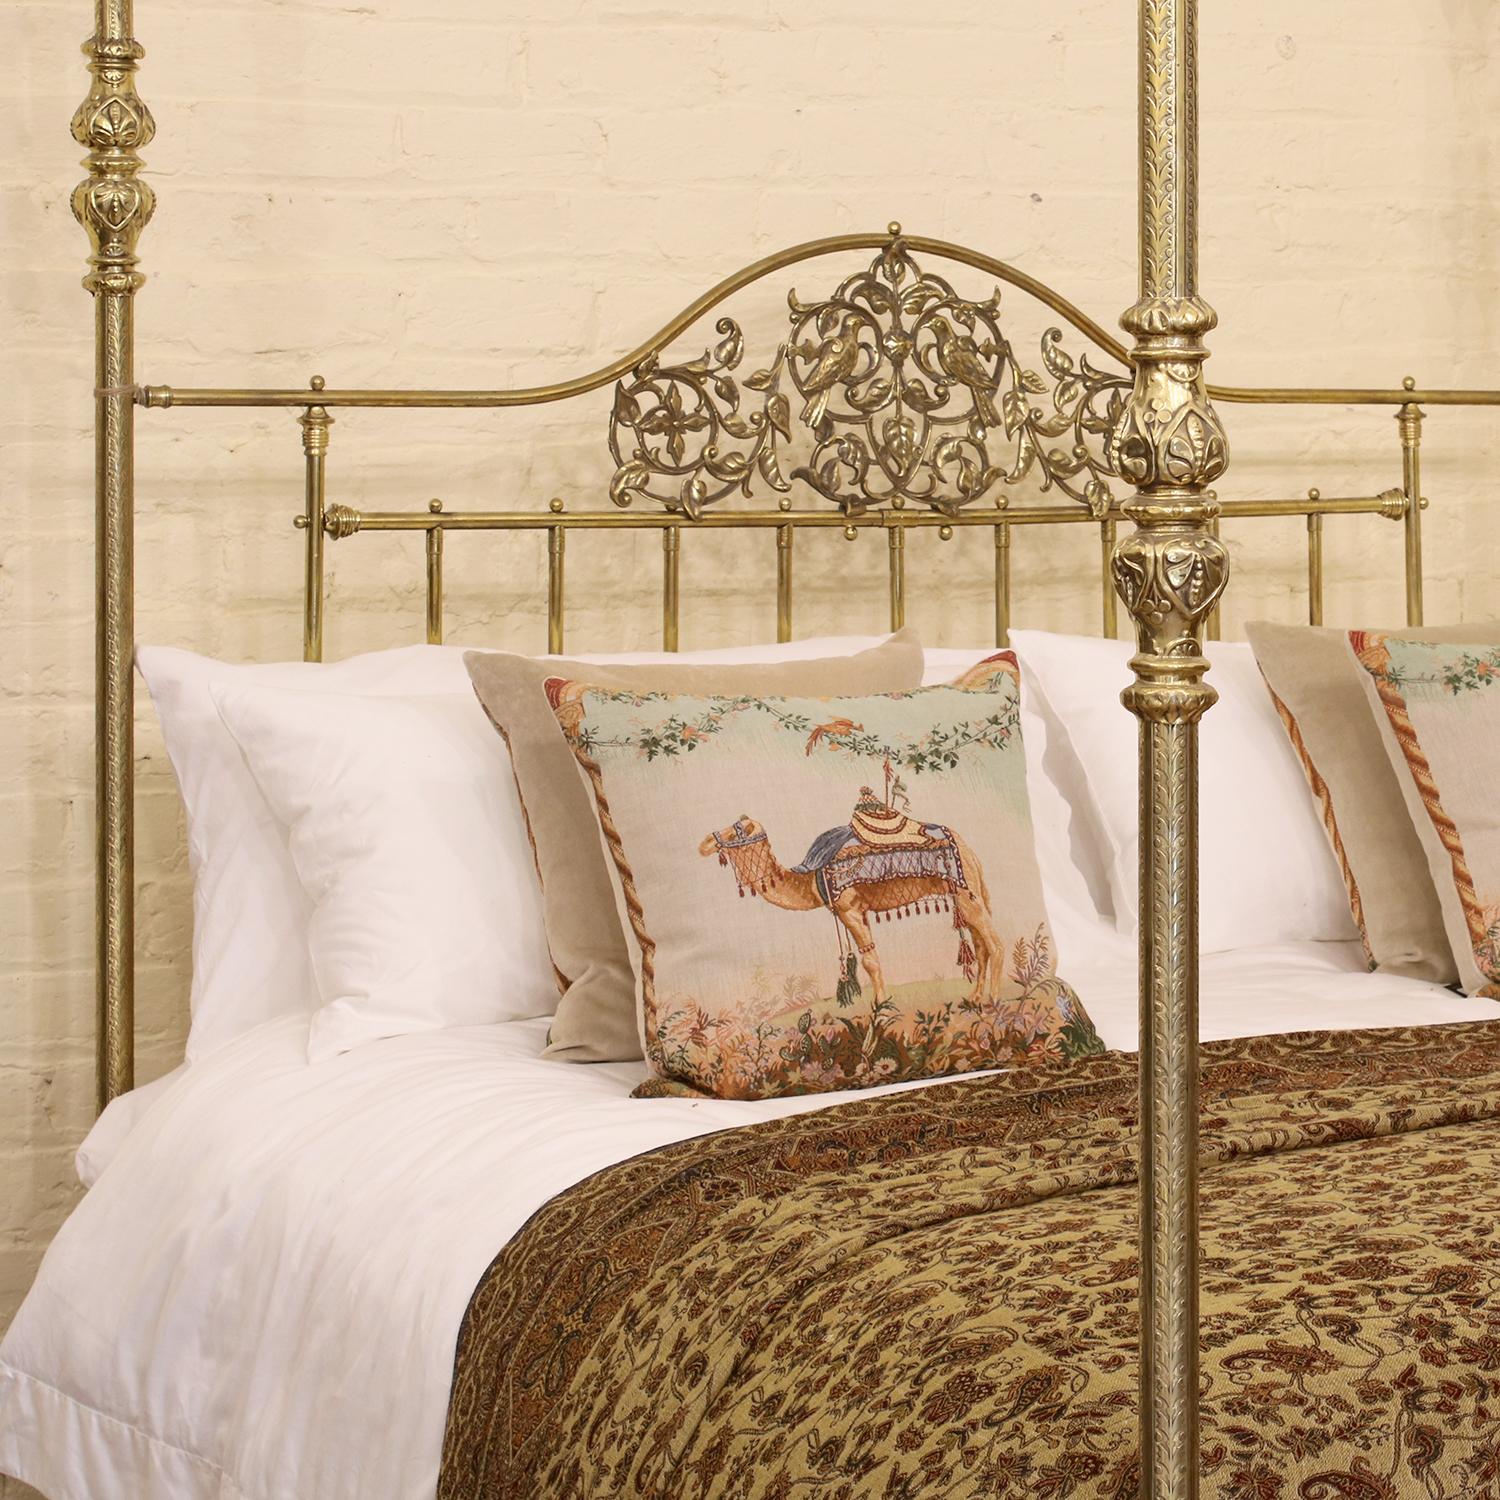 A superb all brass tall post bed with intricate pressed-brass posts, ornate brass fittings and large brass casting on the head panel depicting love birds. 

Originally manufactured in Birmingham, circa 1870, this bed was made for export and was